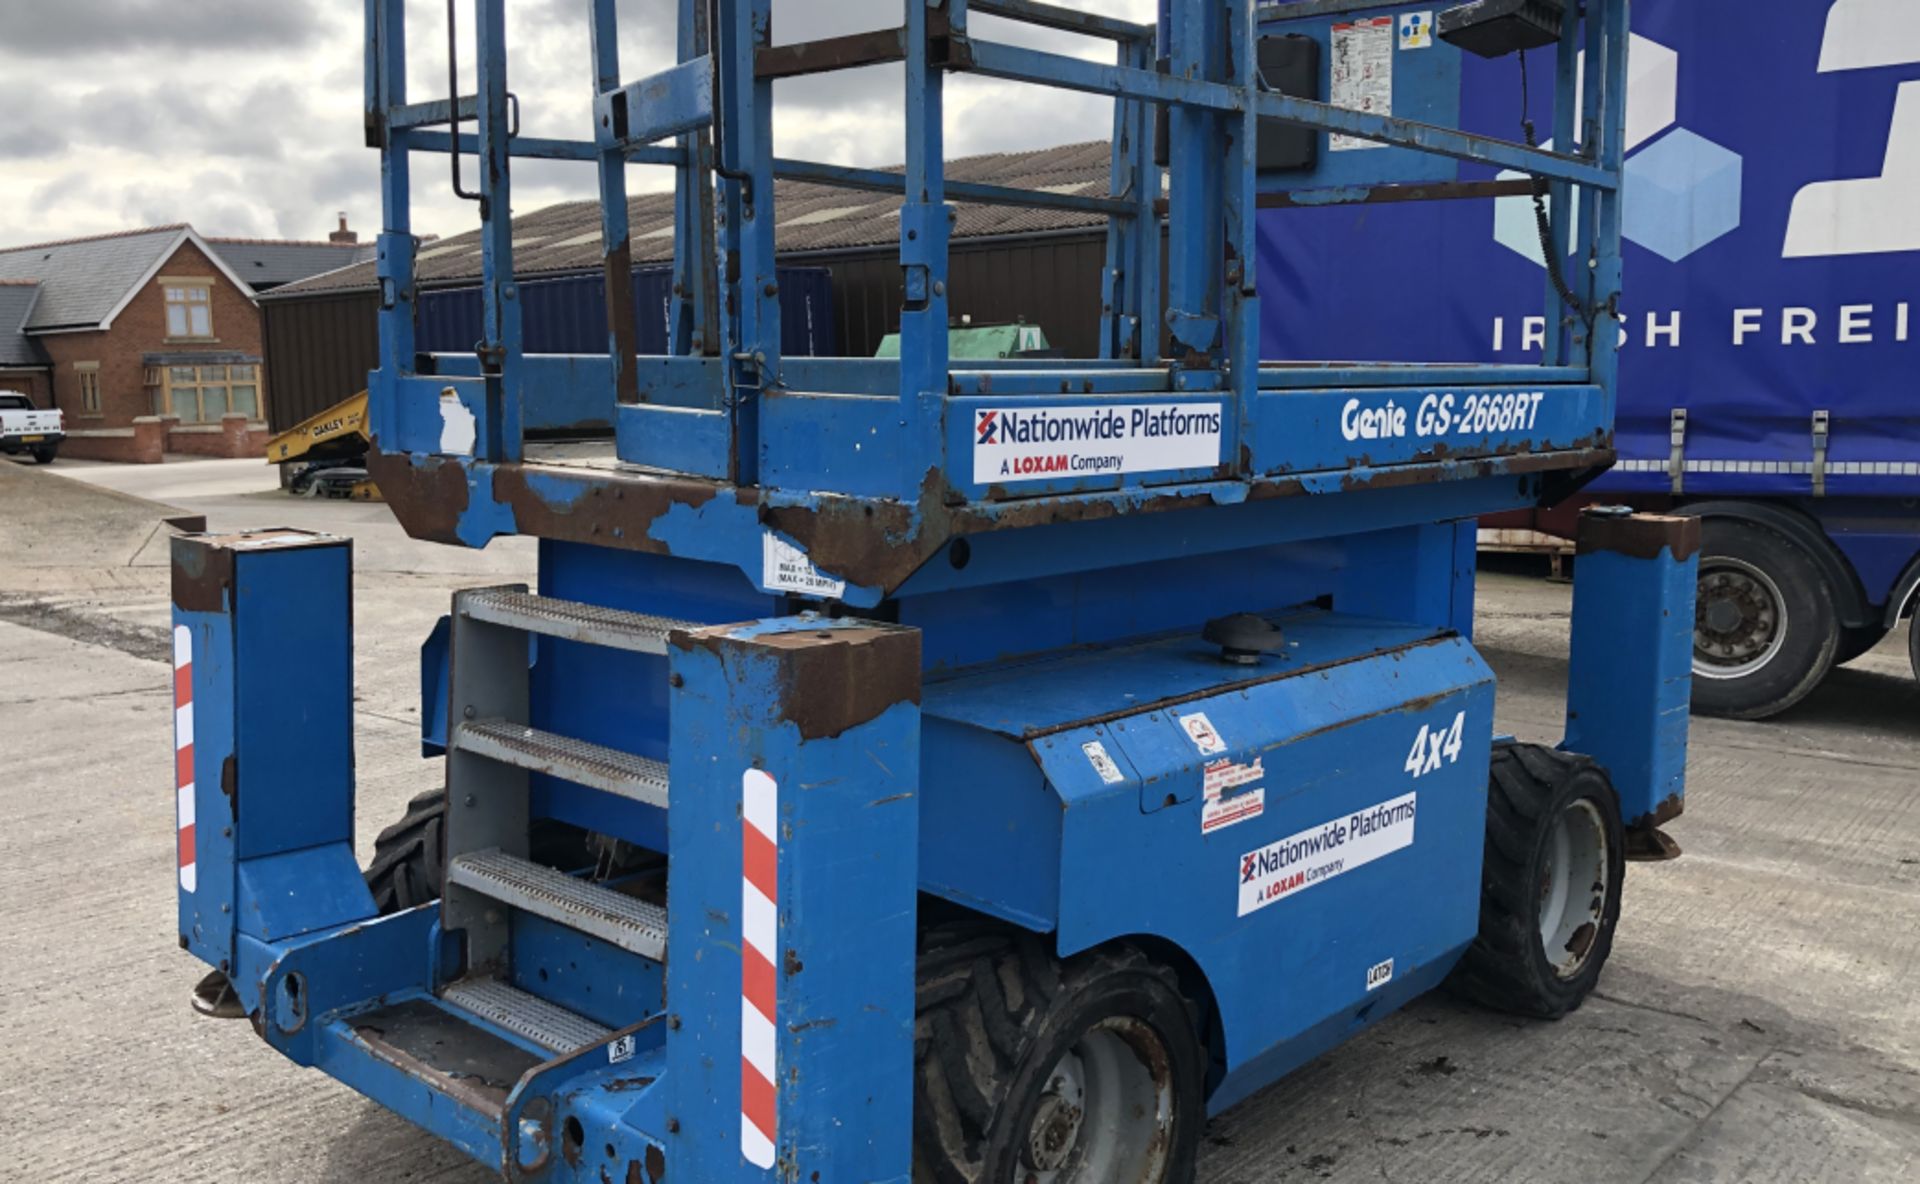 4×4 SIZZLER LIFT | 10M LIFT 2008 GENIE GS 2668 RT - Image 3 of 15